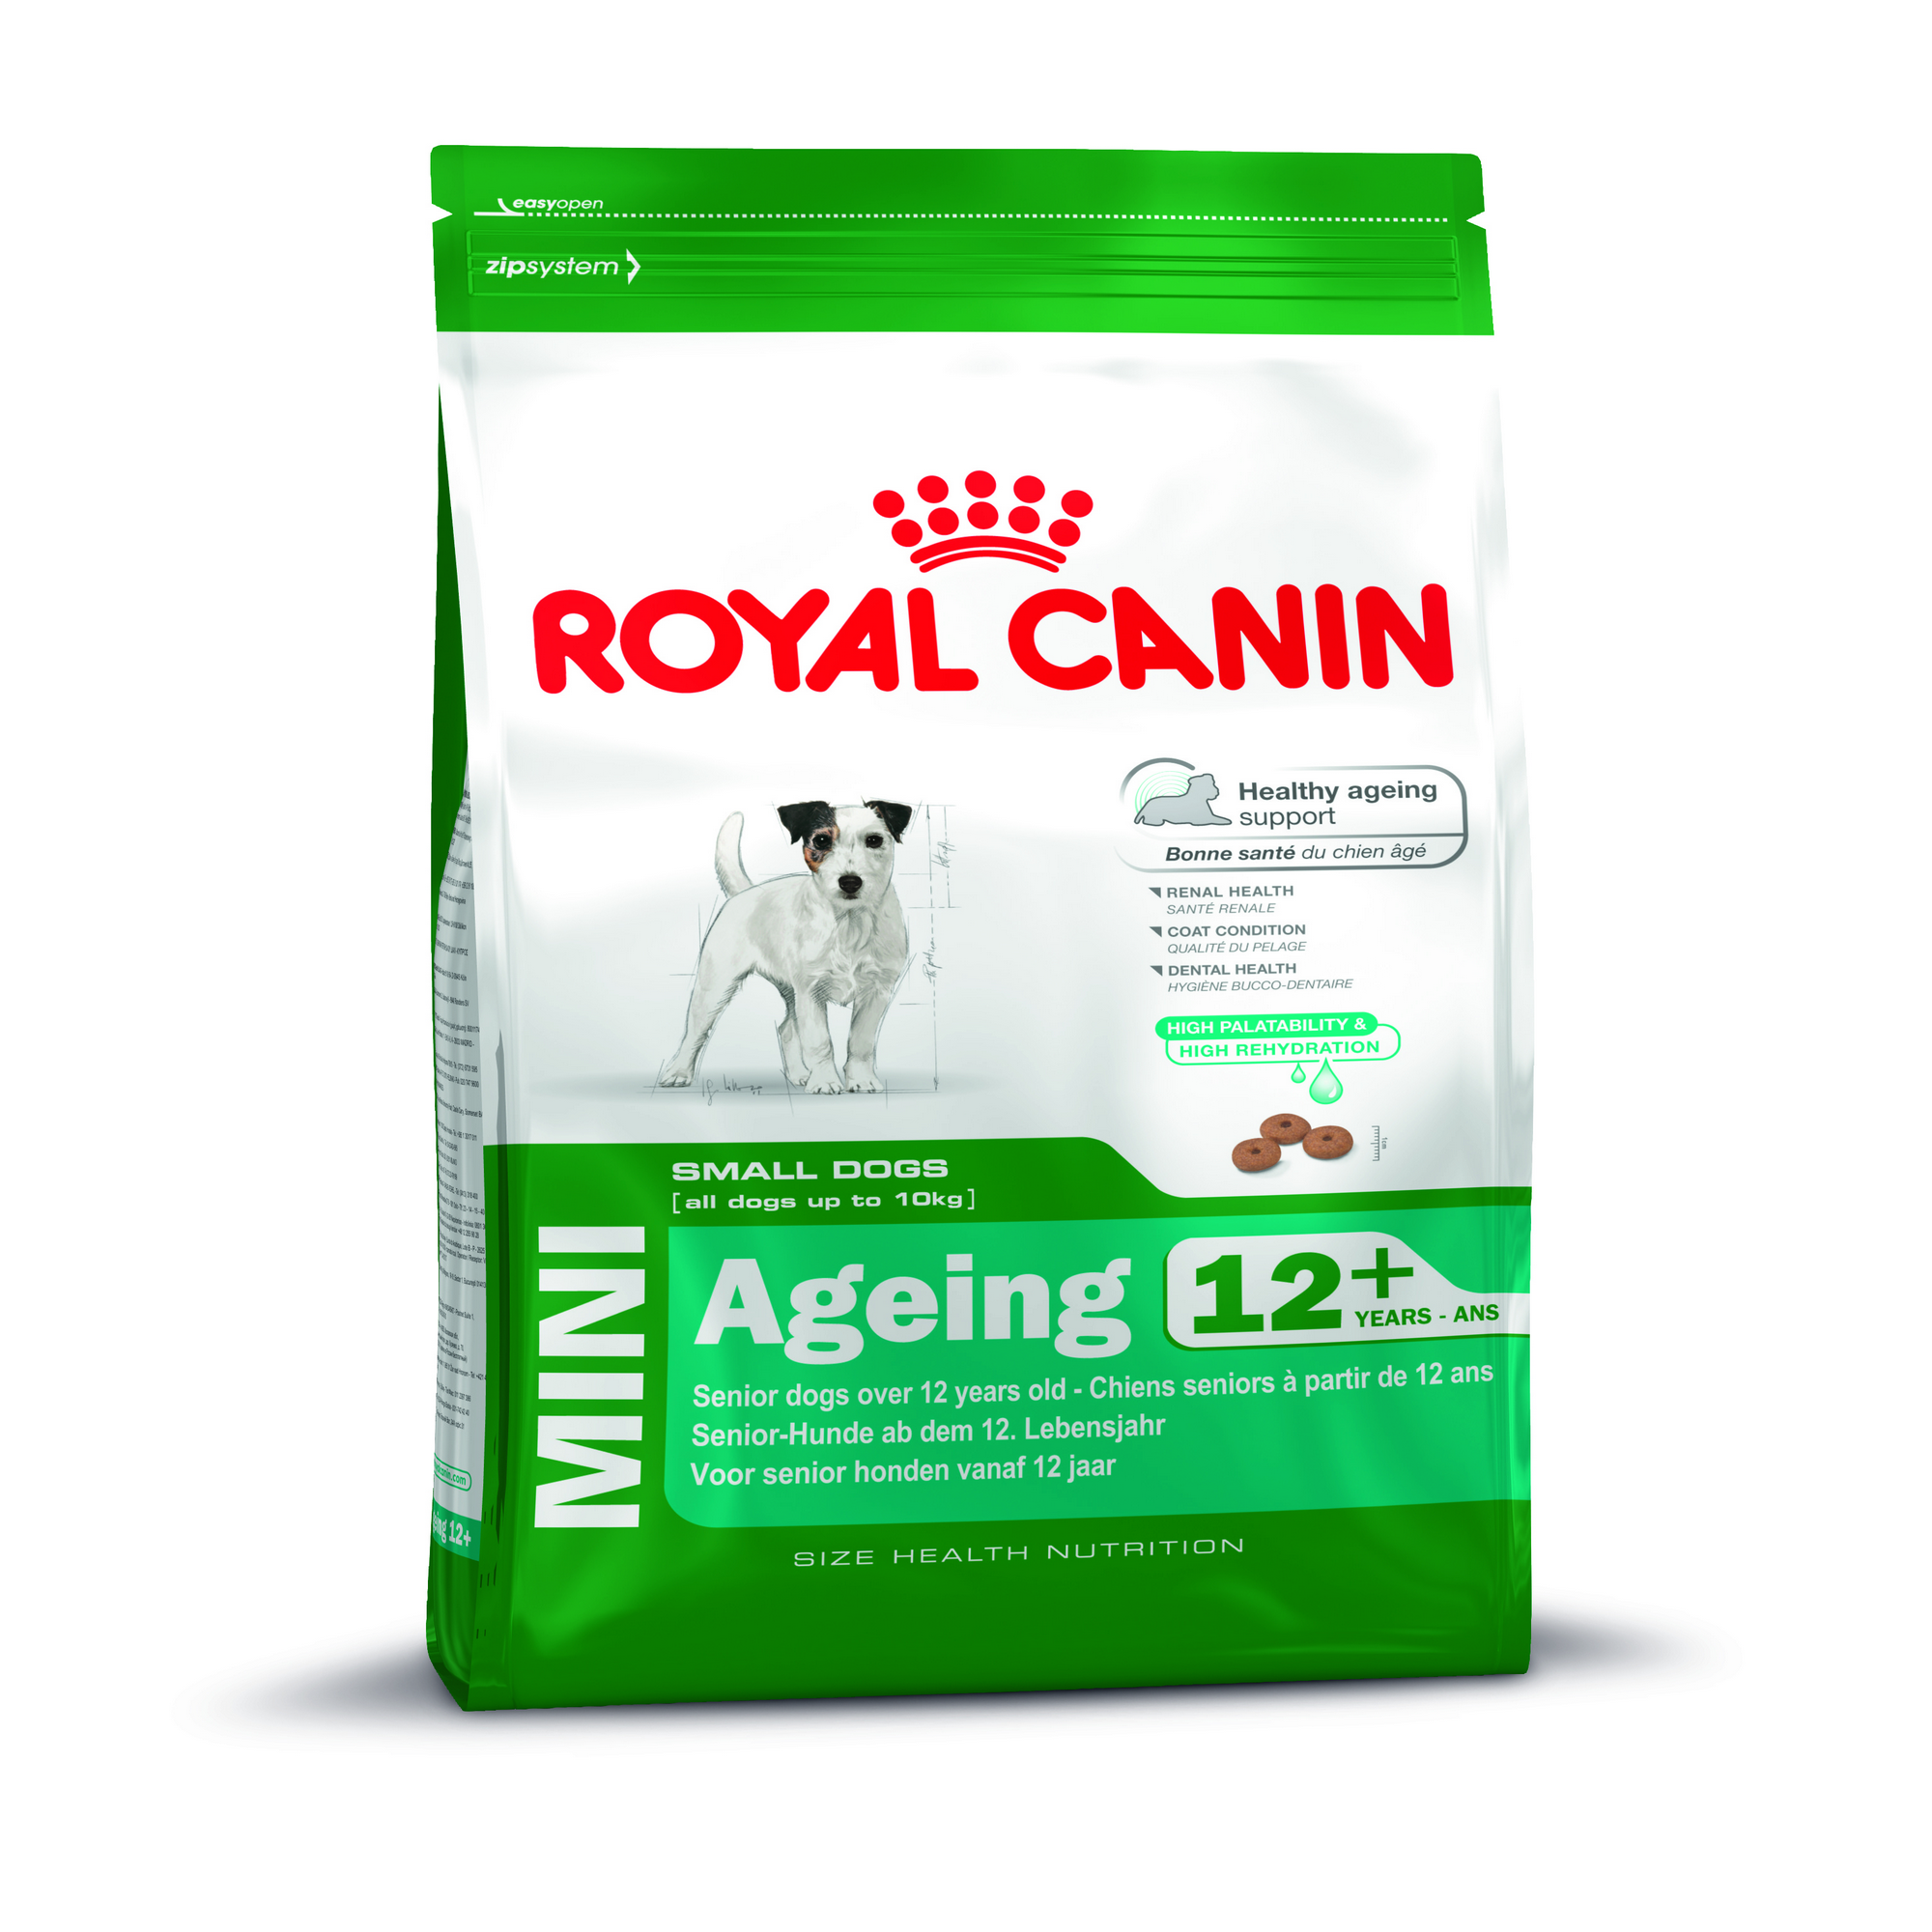 Royal Canin MINI Ageing 12 3,5 Kg + product picture